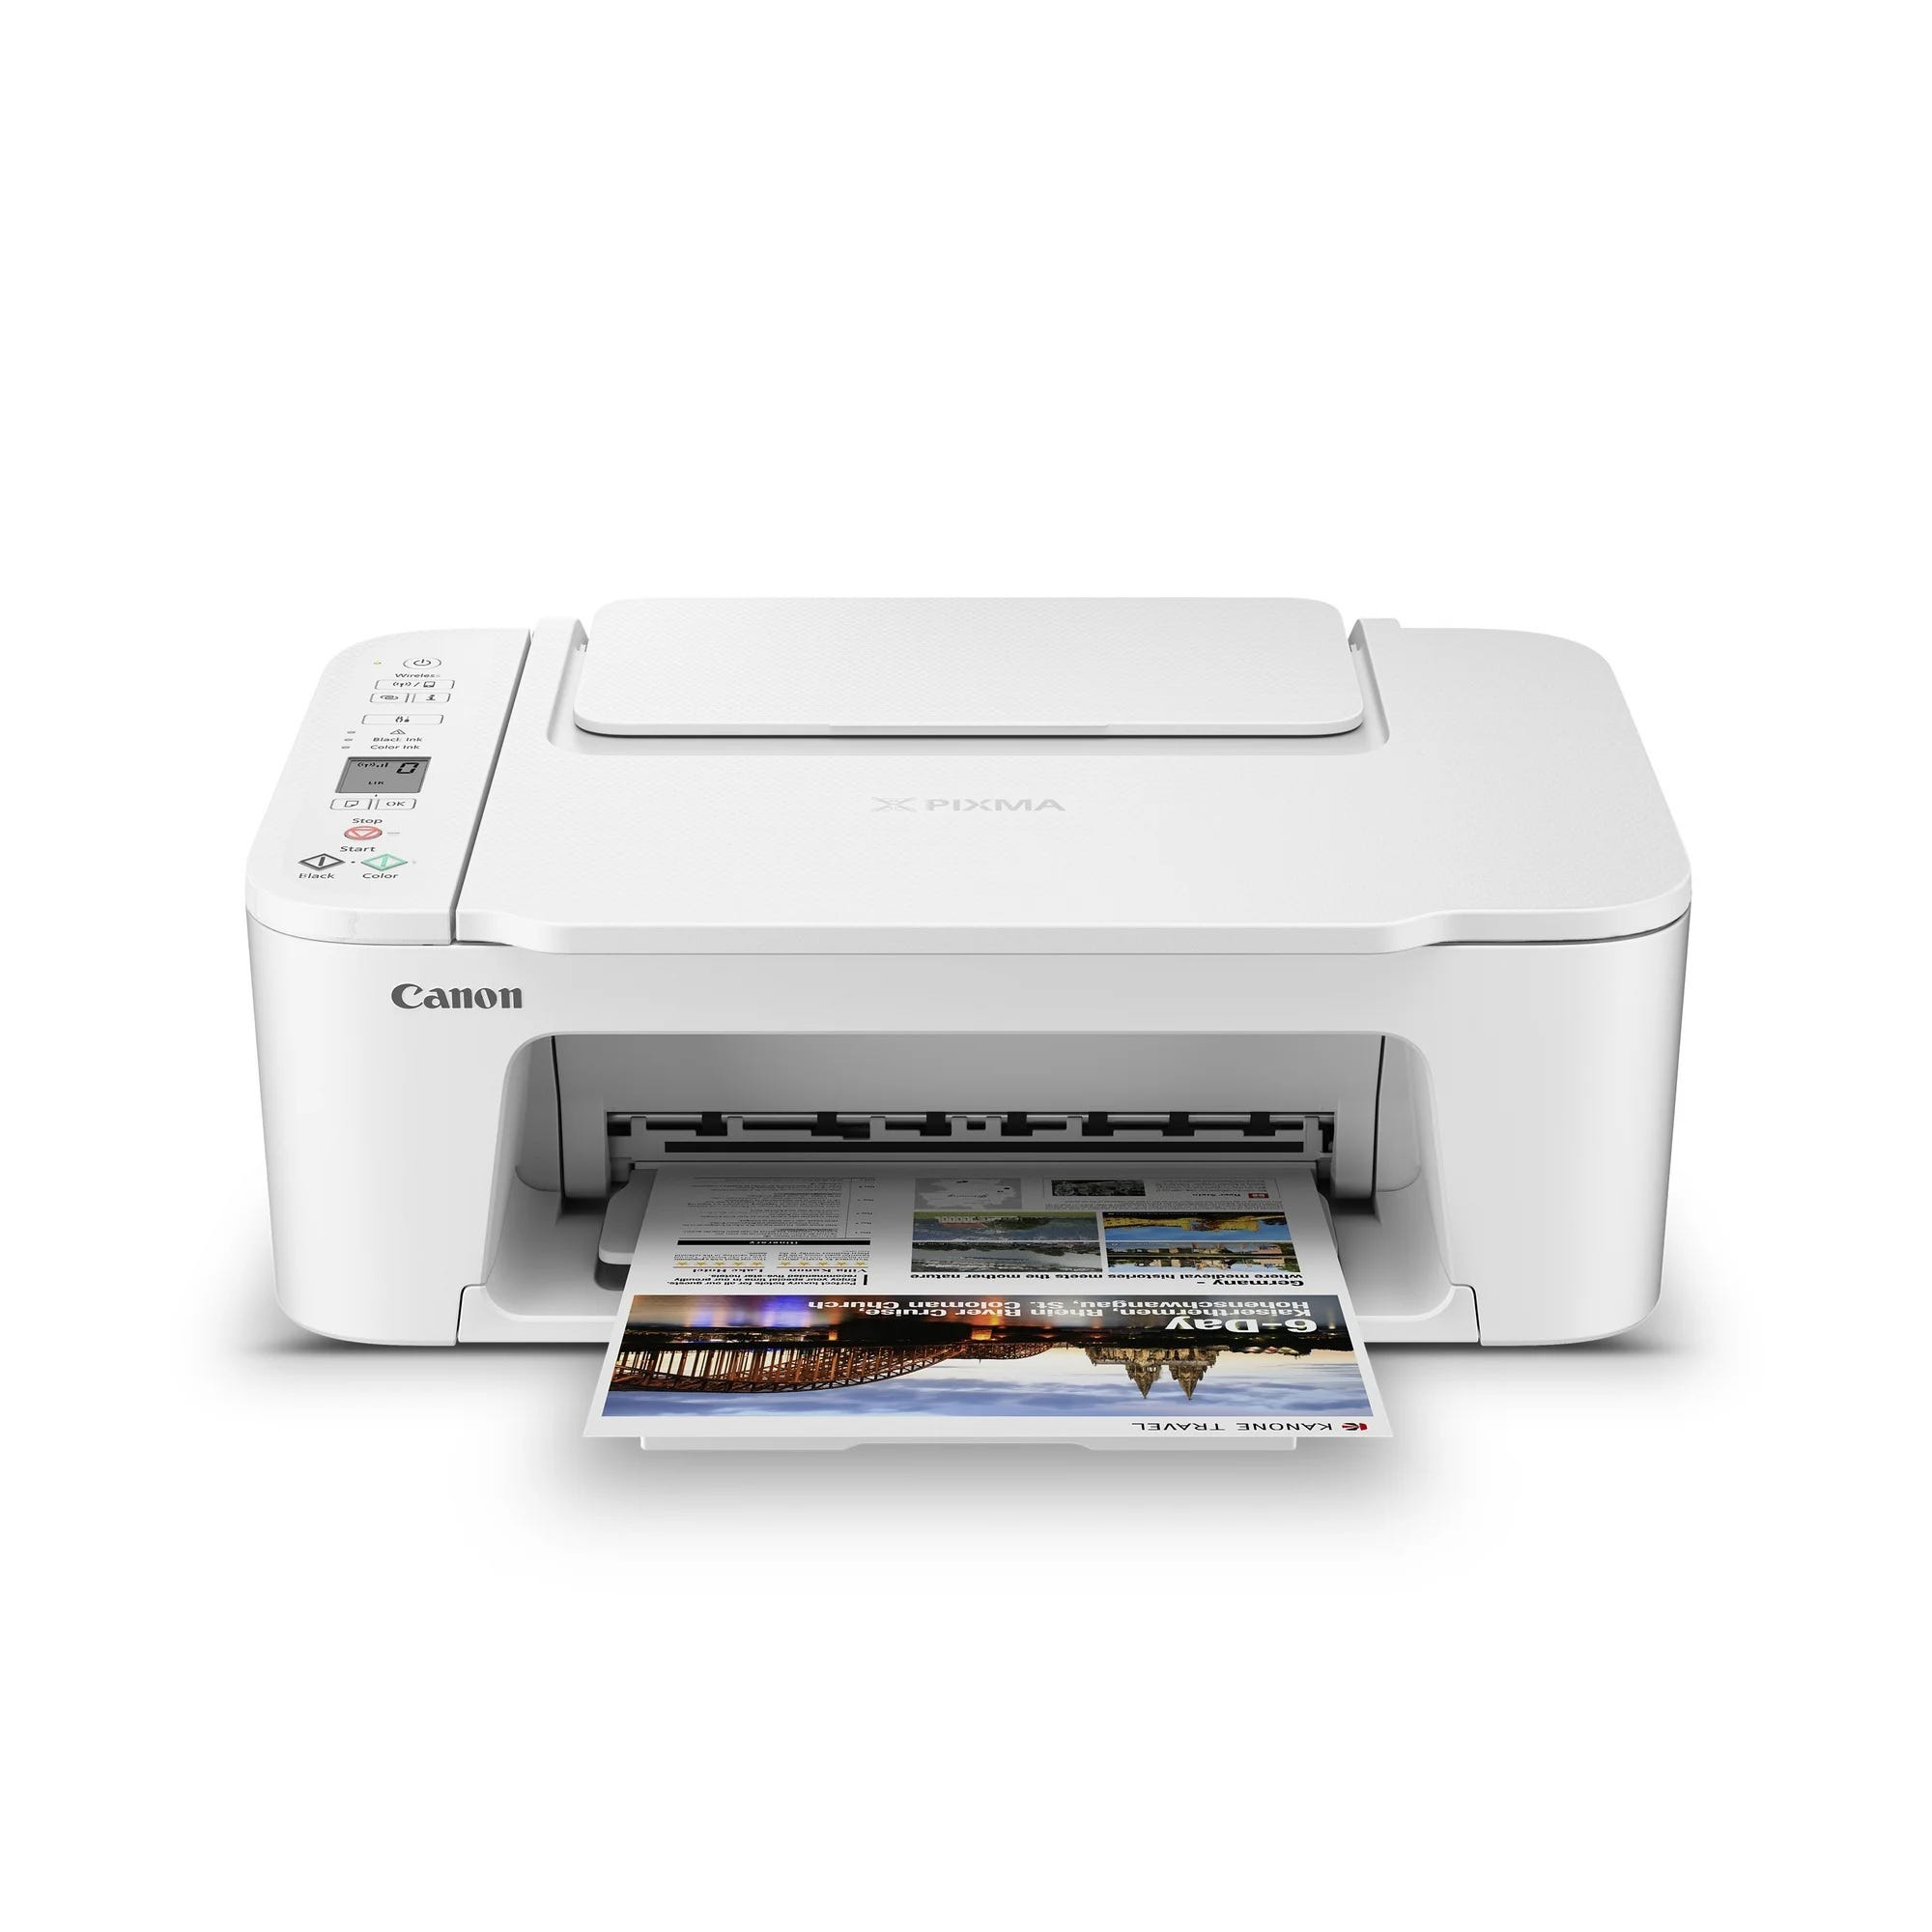 White Canon PIXMA printer with printed color photos emerging from the output tray.